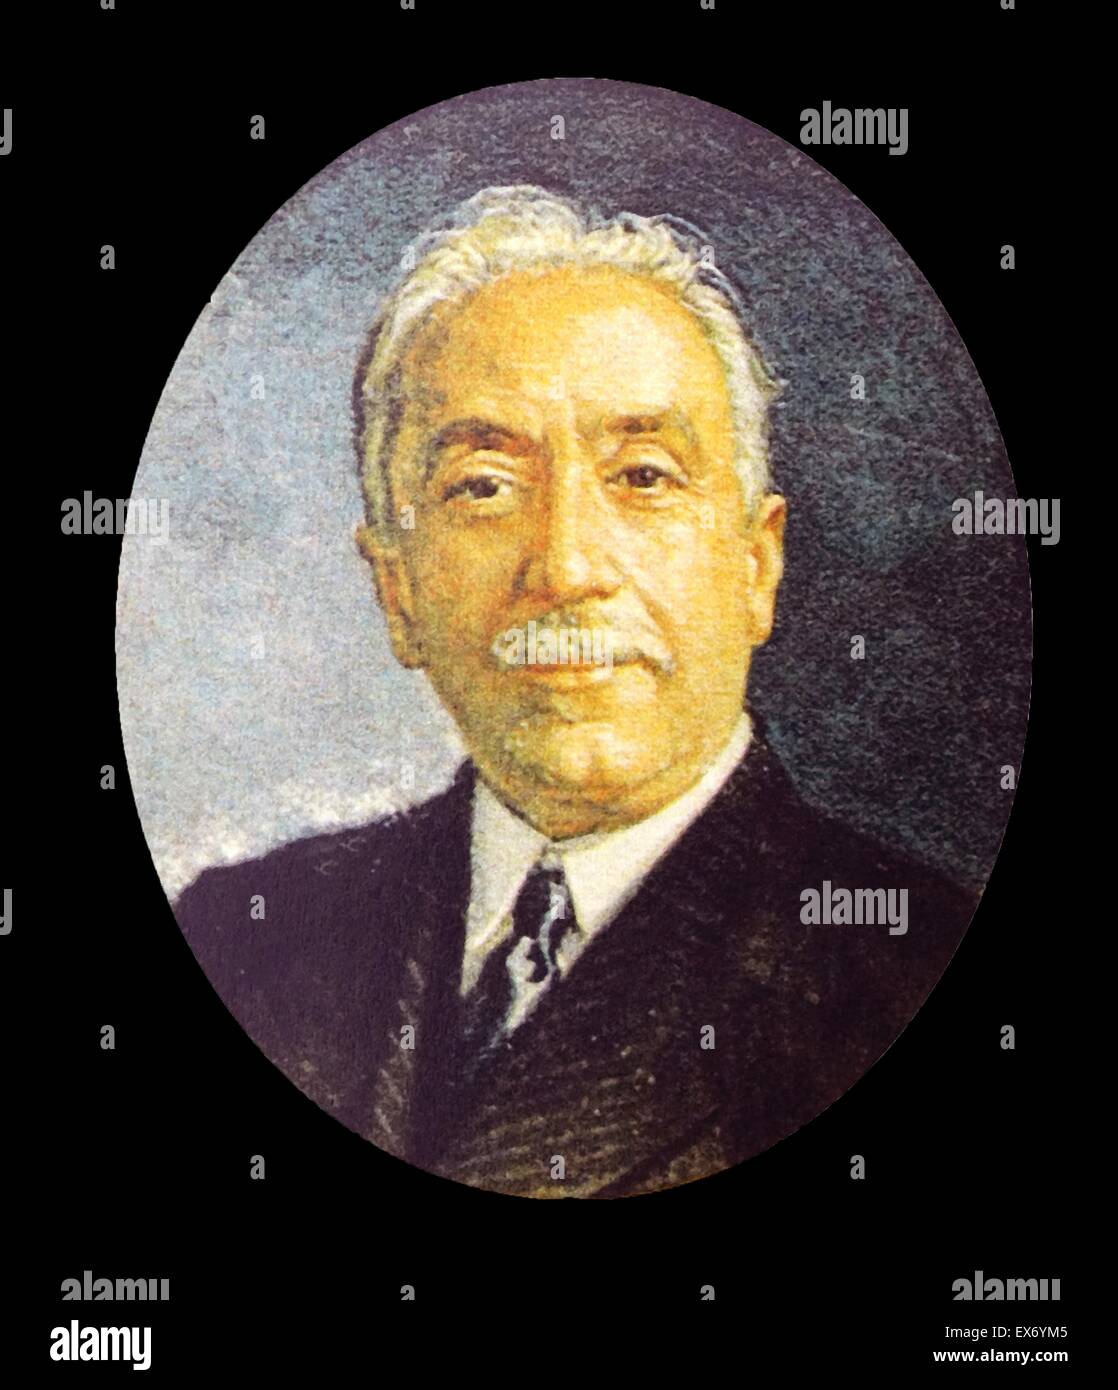 A portrait of Niceto Alcalá-Zamora y Torres (6 July 1877 – 18 February 1949) was a Spanish lawyer and politician who served, briefly, as the first prime minister of the Second Spanish Republic, and then—from 1931 to 1936—as its president. Stock Photo